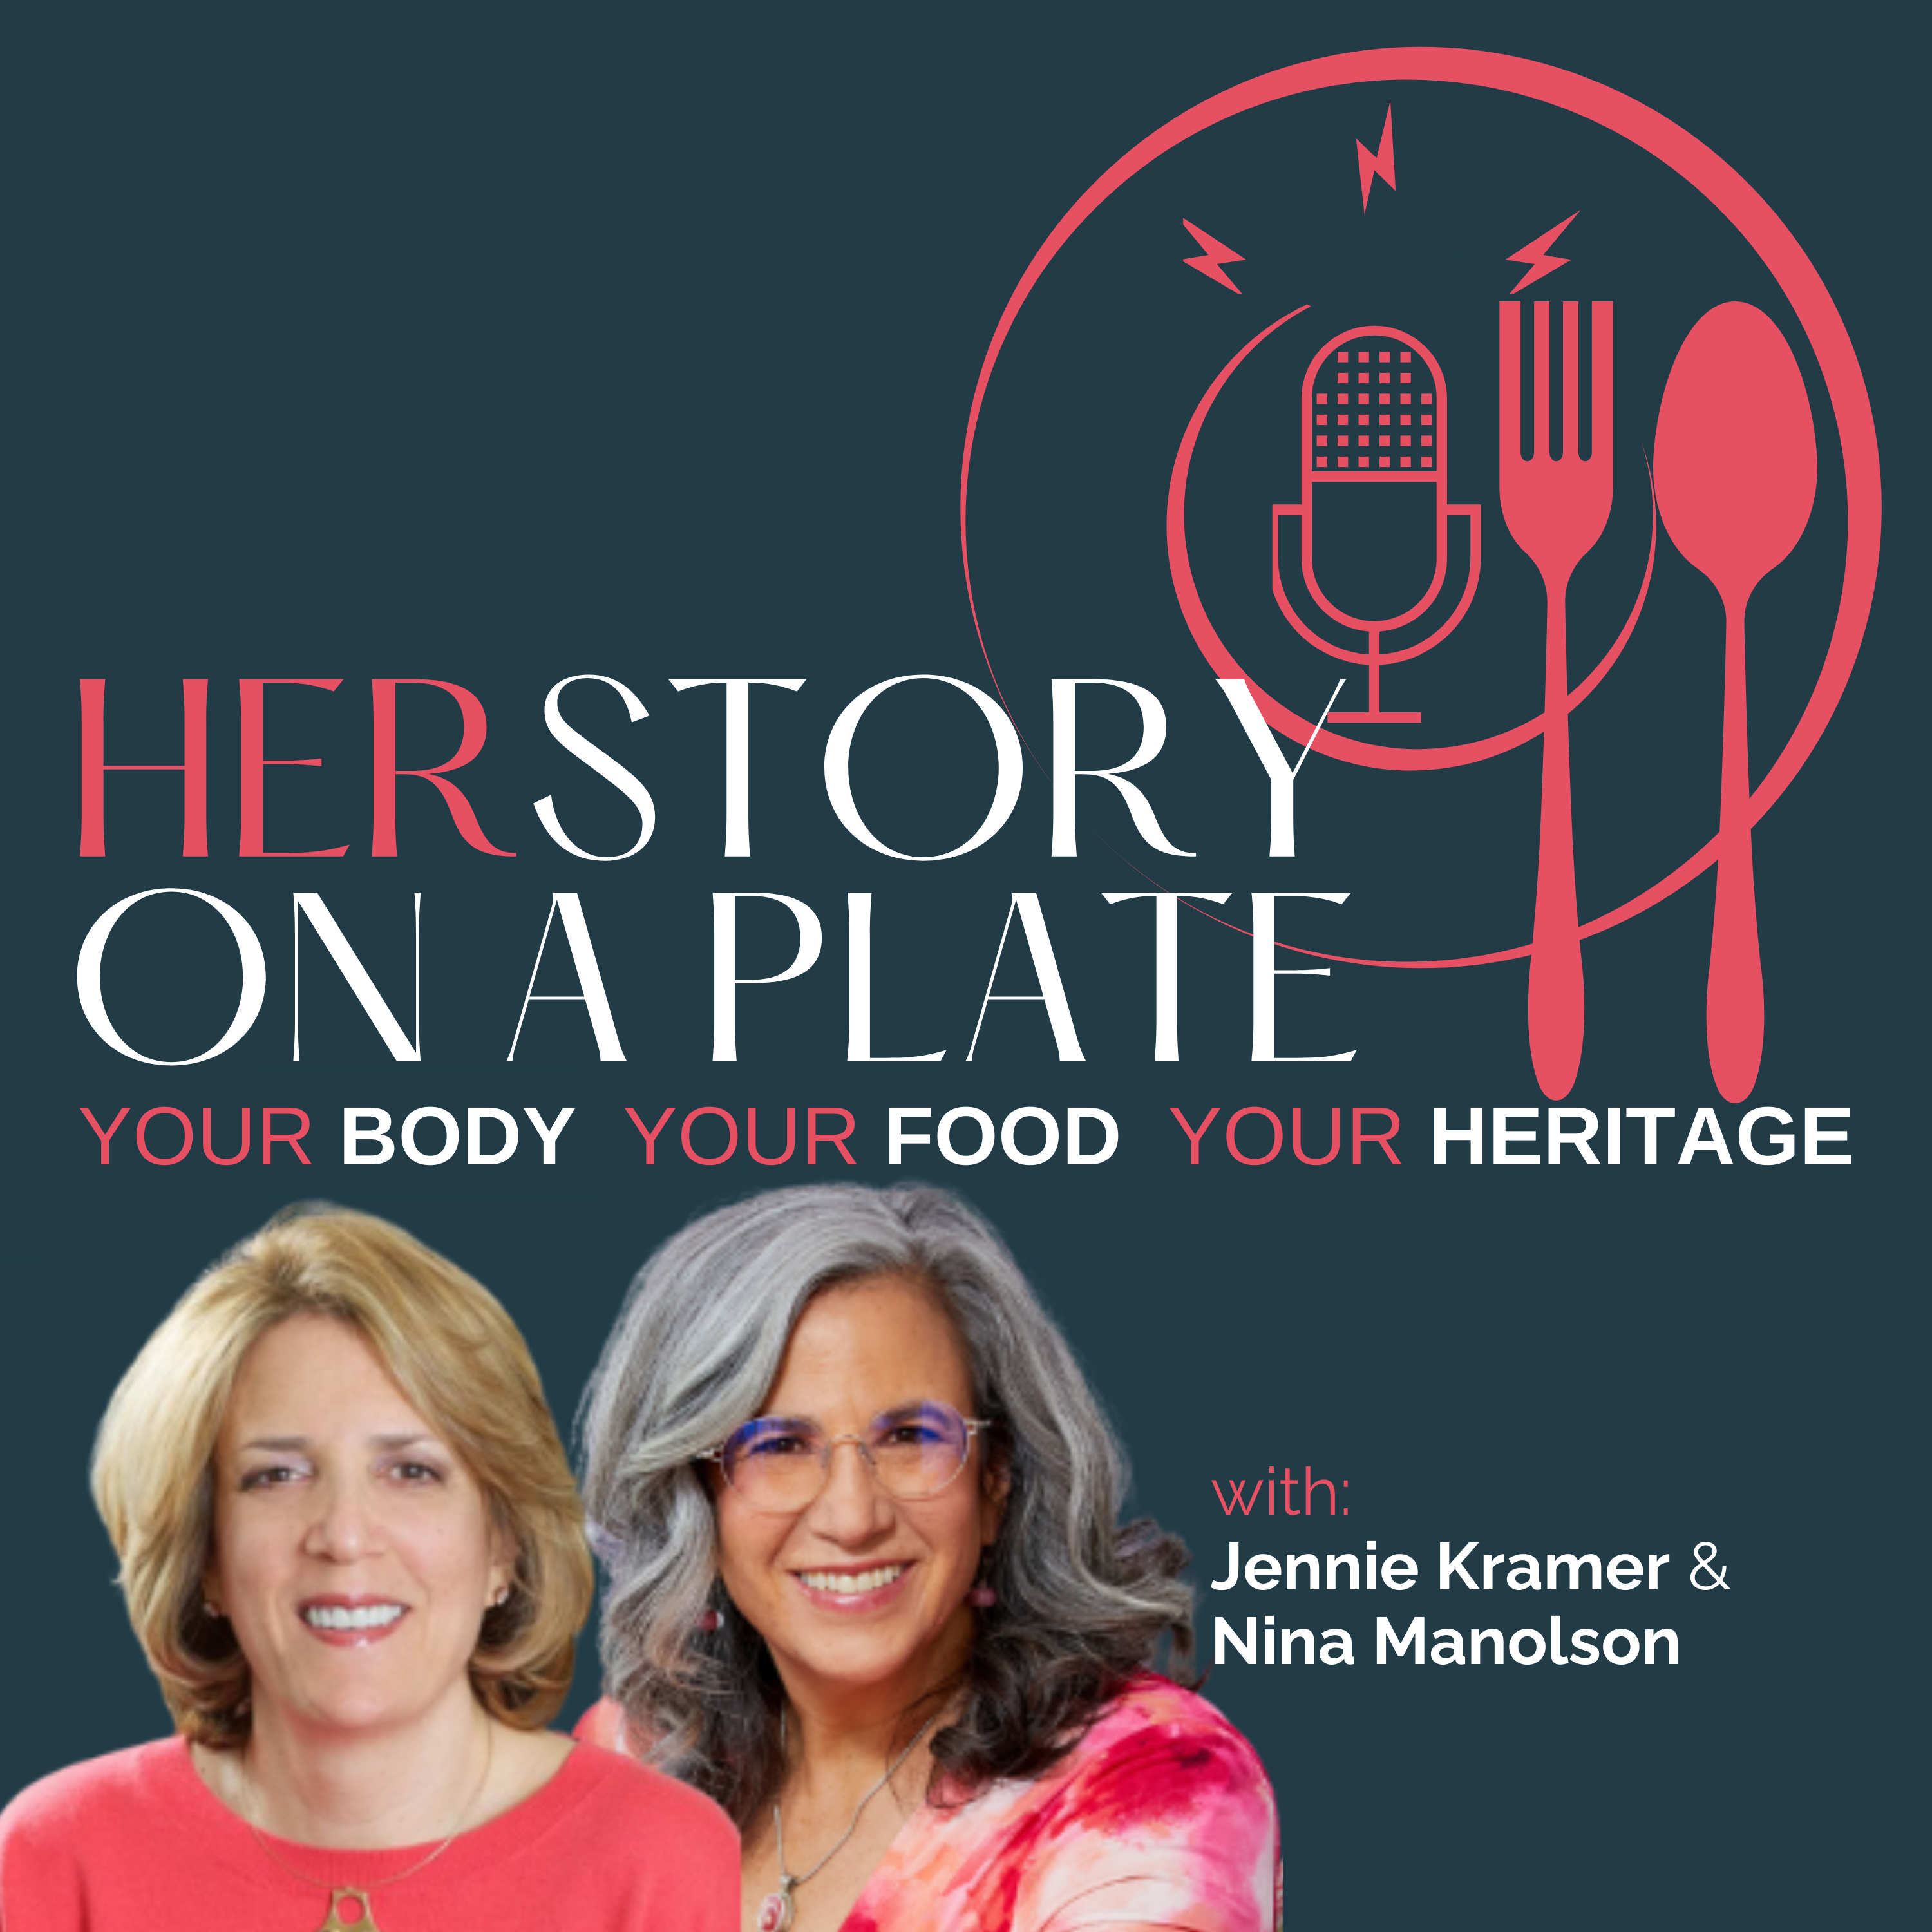 HERStory on a Plate with Nina Manolson and Jennie Kramer